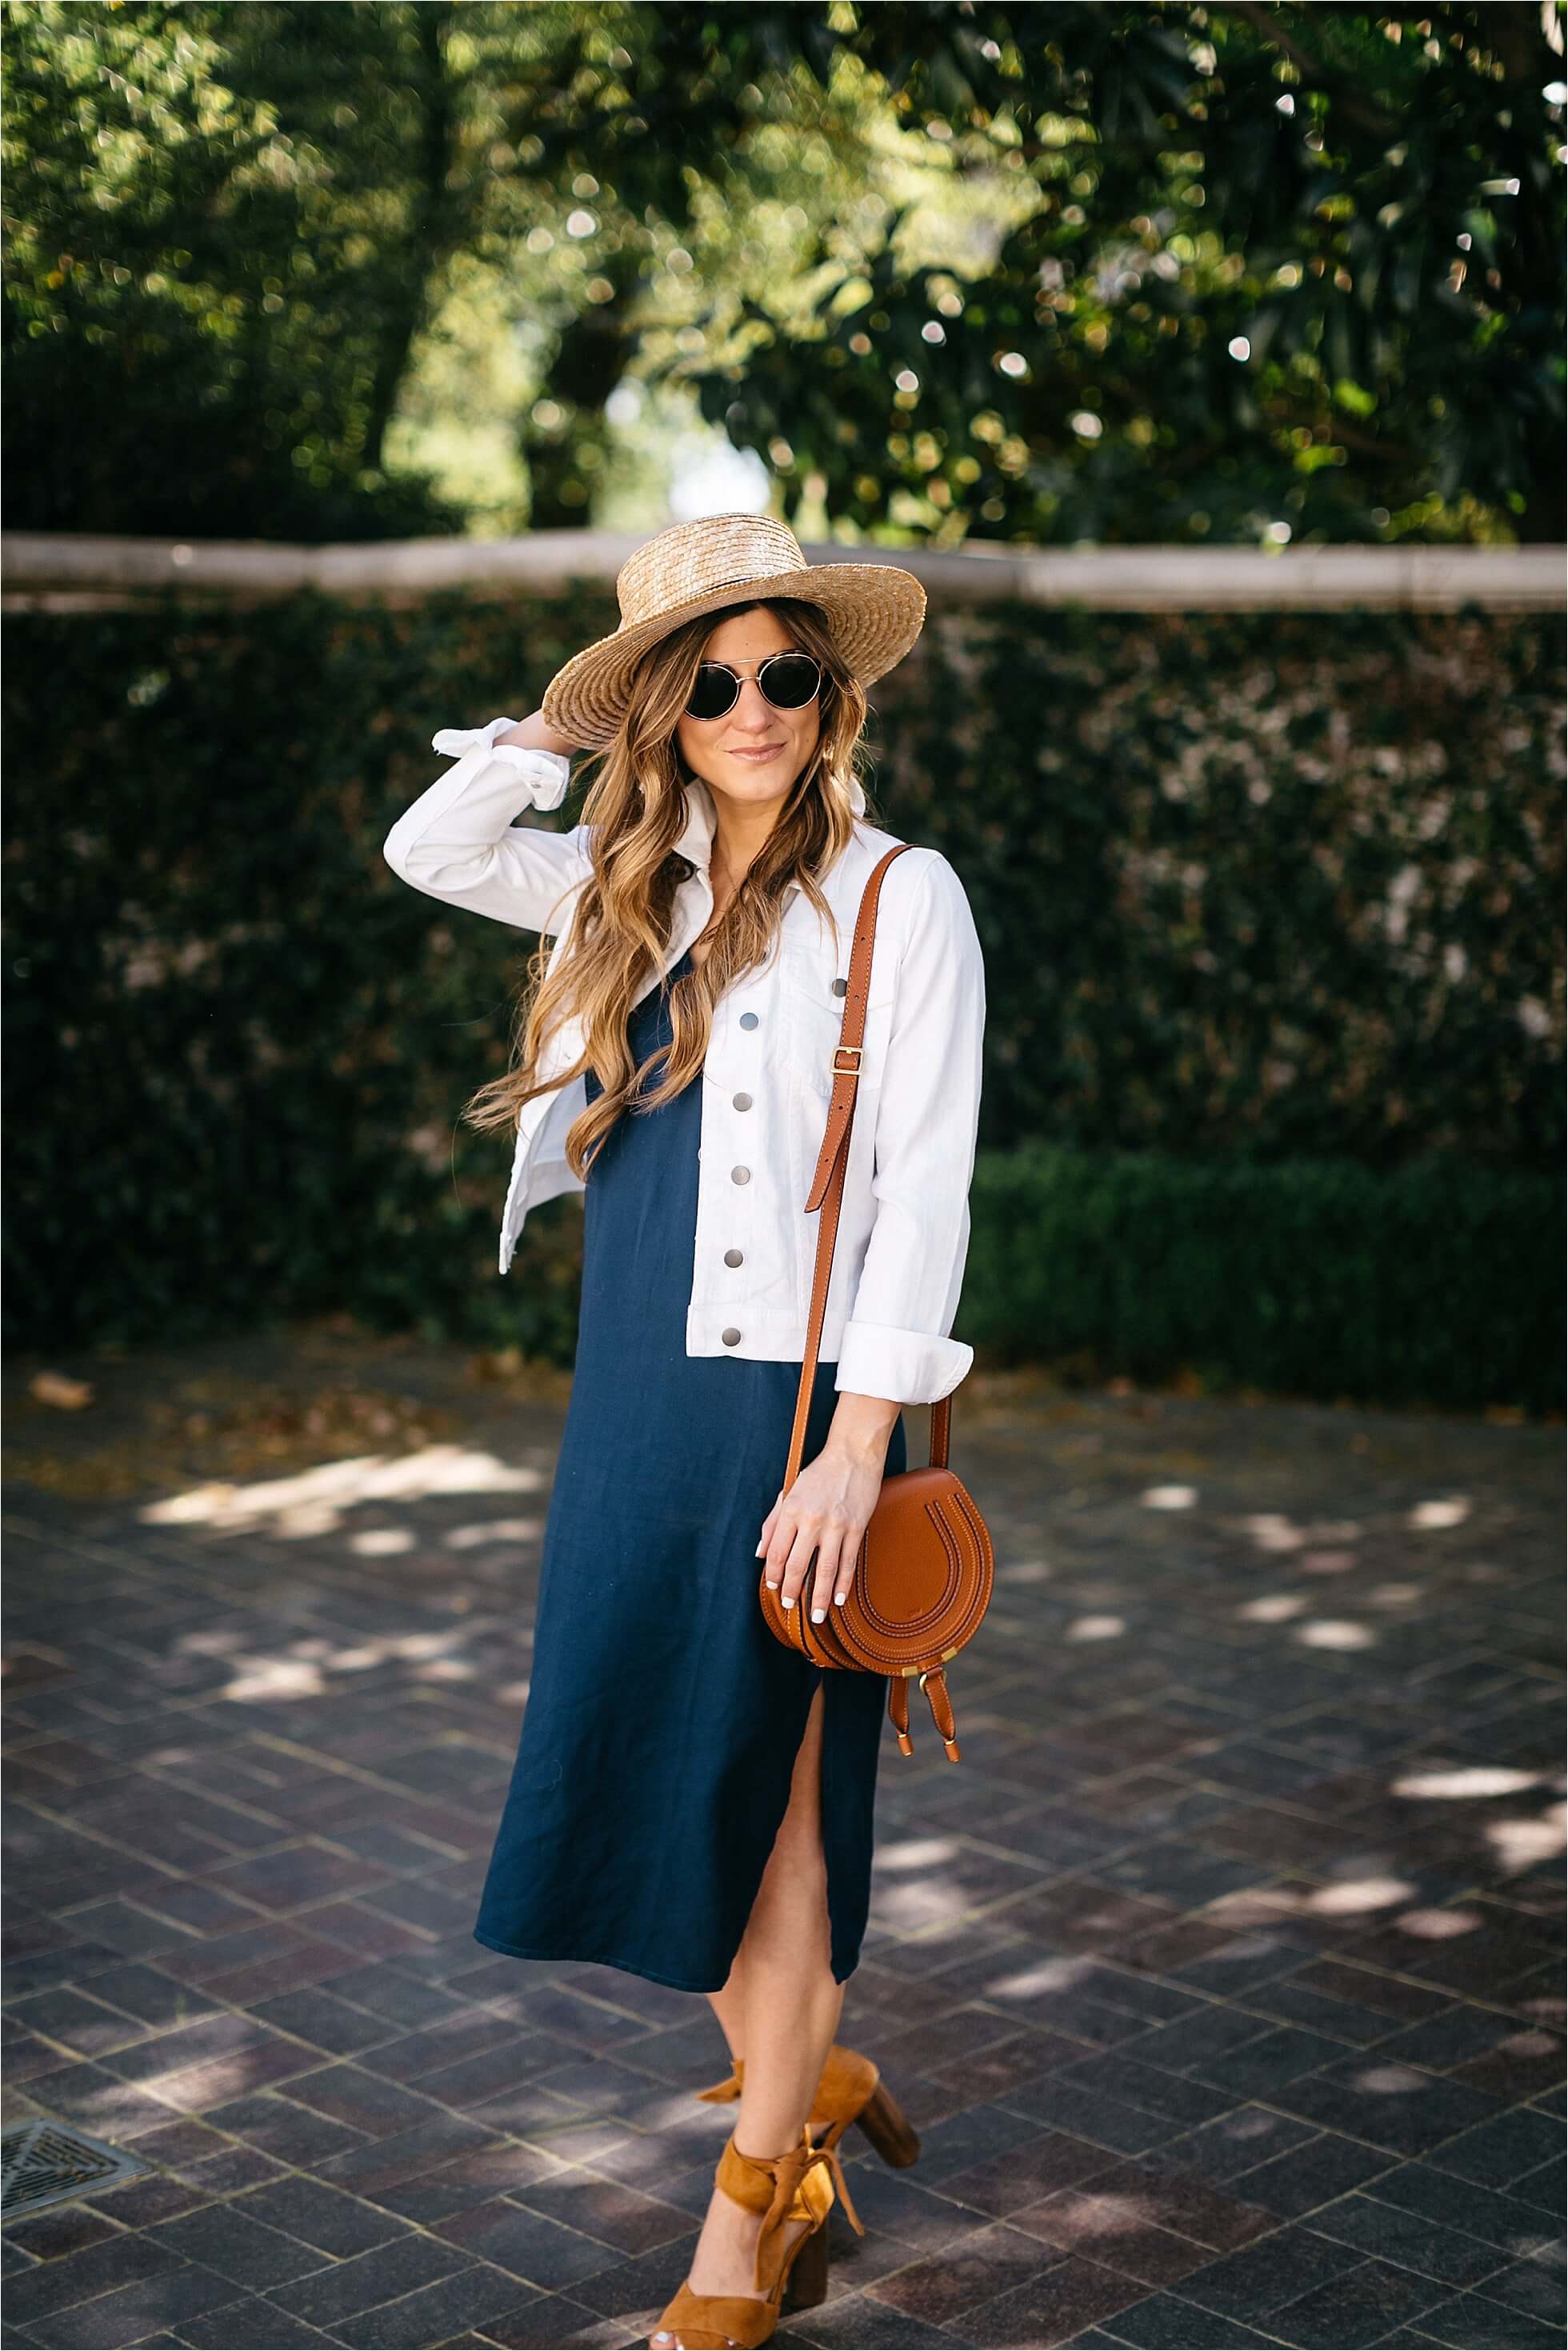 how to style a slip dress, splendid navy midi slip dress, cognac suede shoes, boater hat, chloe drew bag, spring outfit